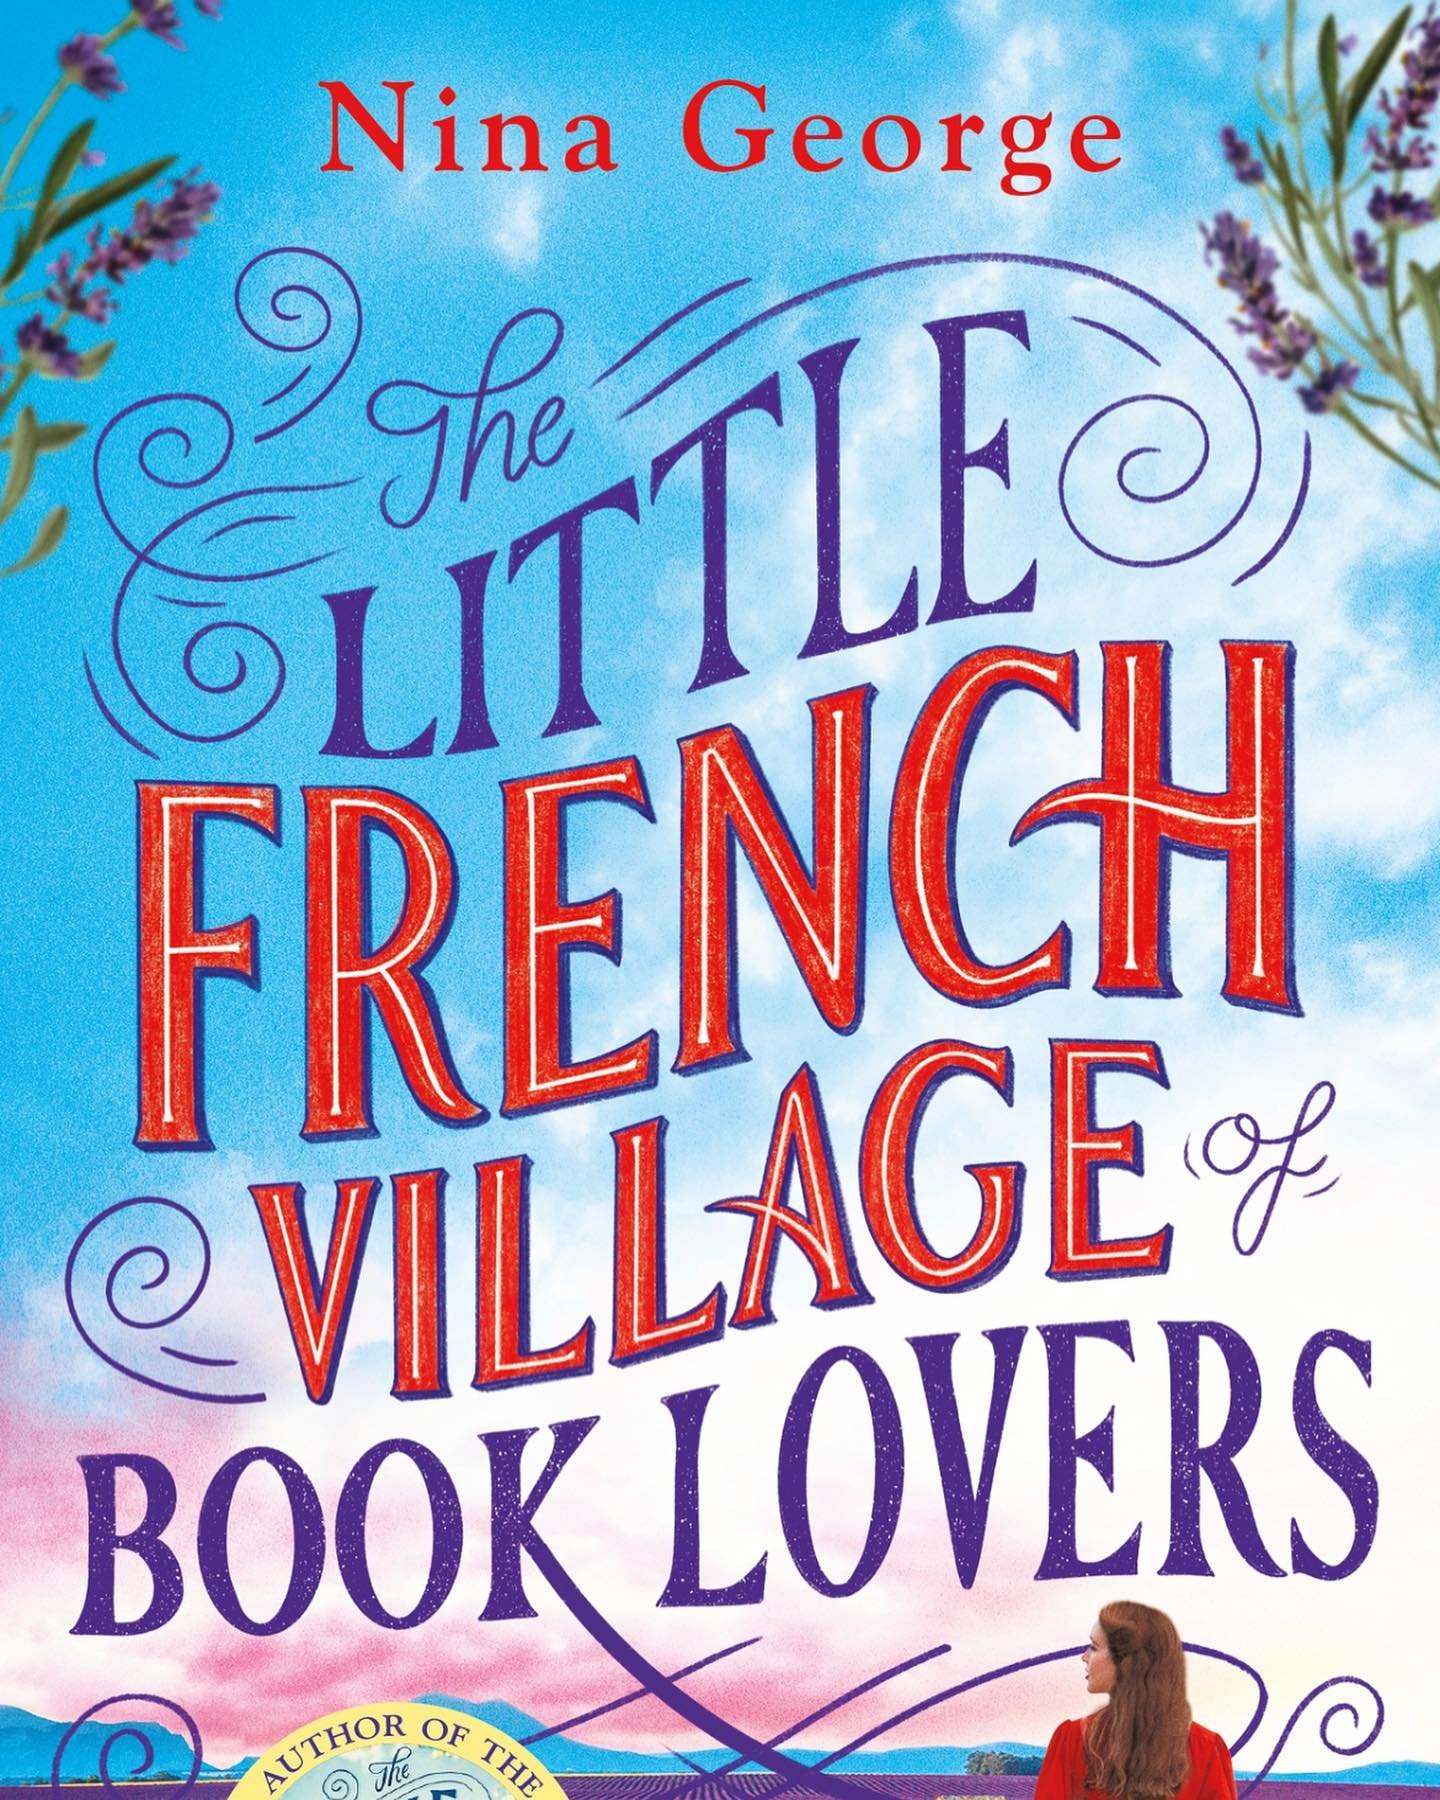 Currently reading 3 books and this is one of them, &lsquo;The Little French Village of  Booklovers&rsquo; by Nina George. Based in the Dr&ocirc;me region of France, in an area that has been on my radar for several years and we are looking forward to 